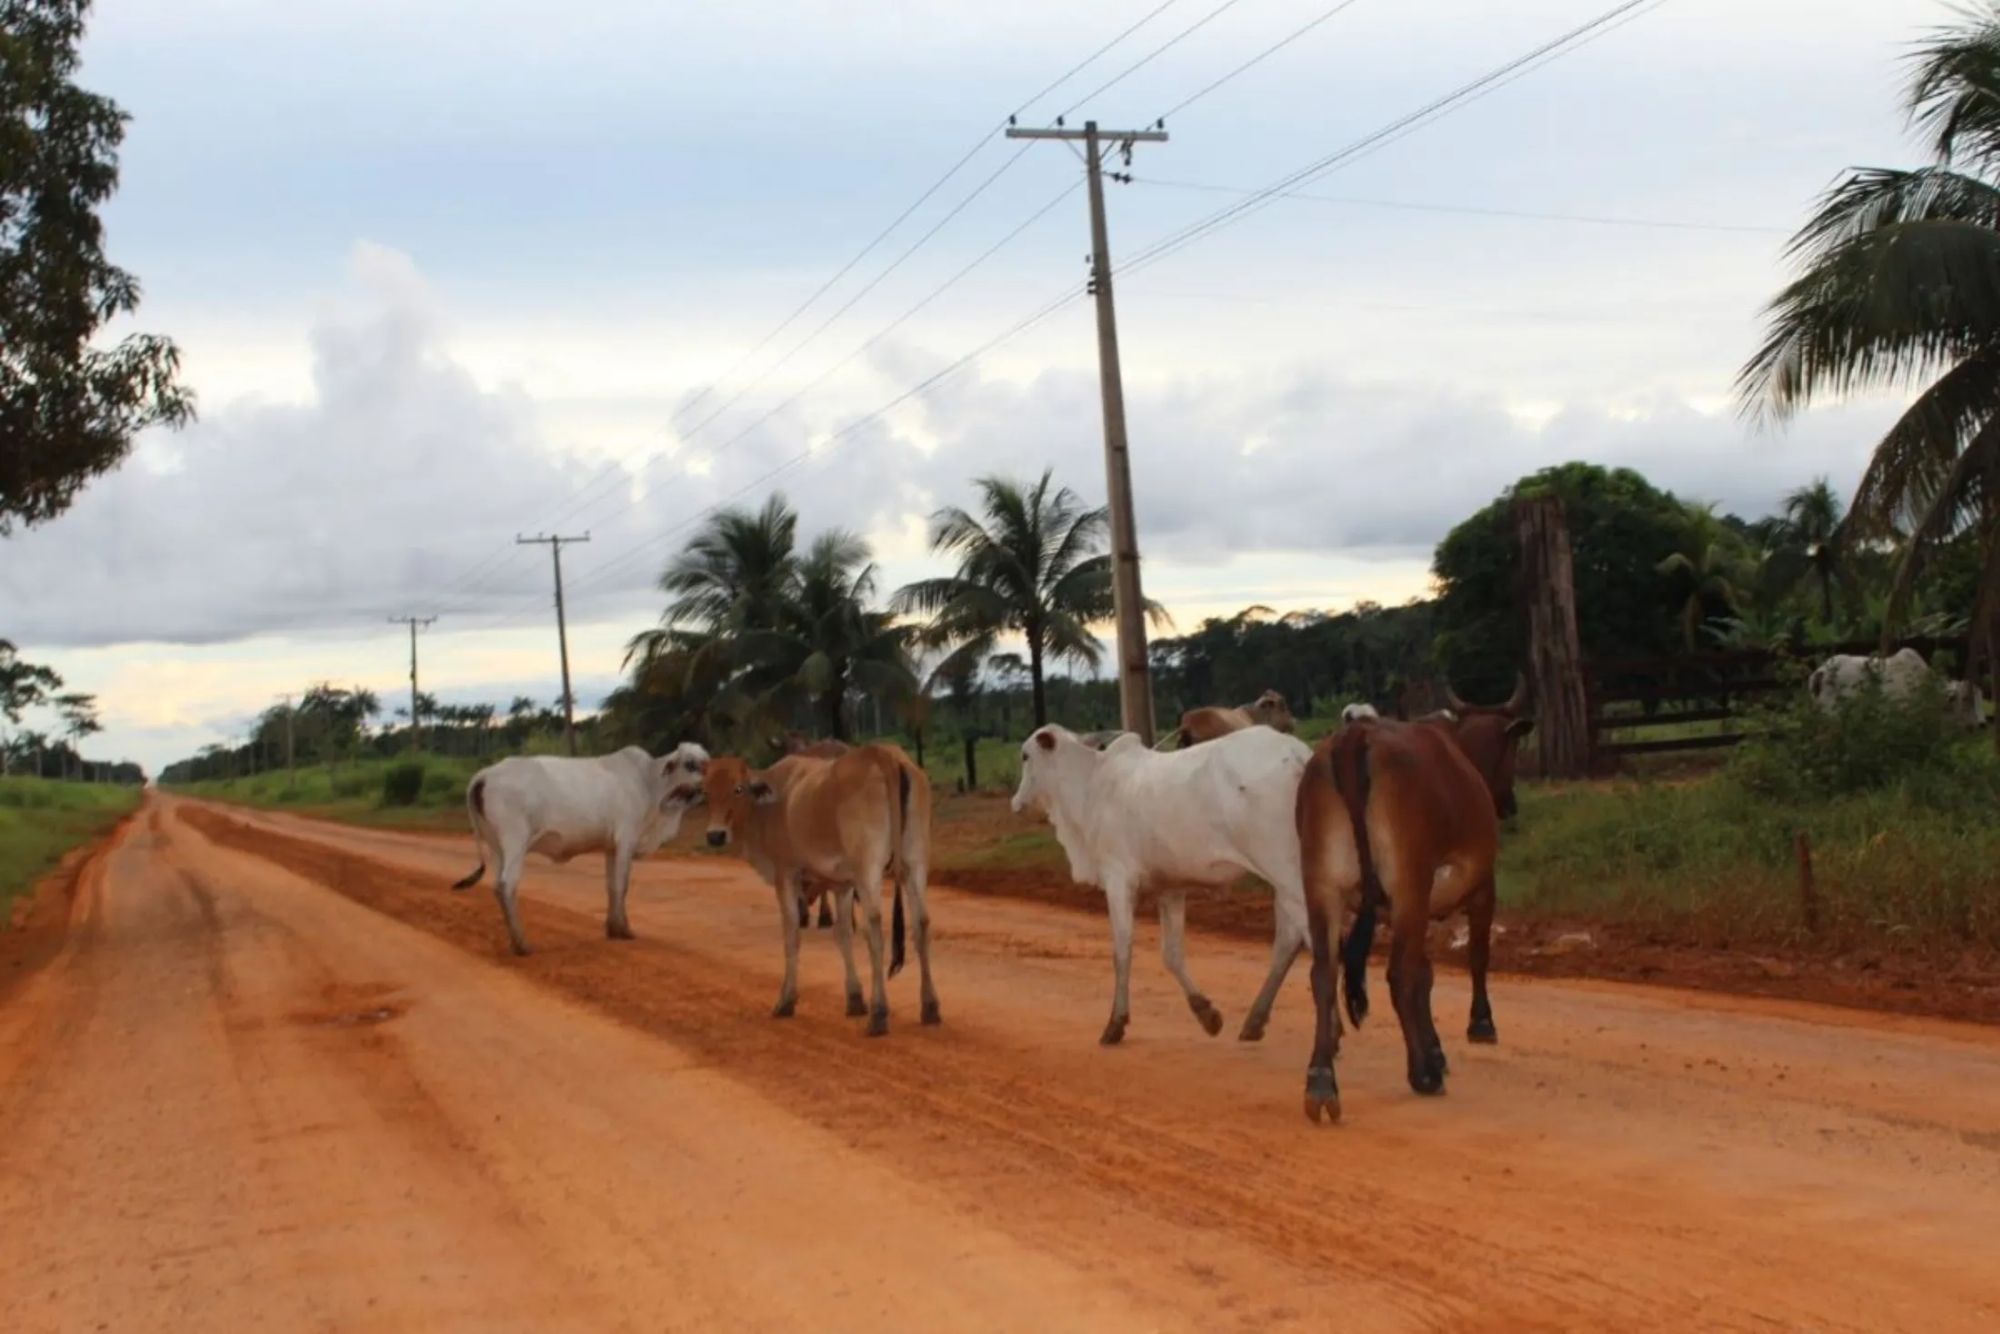 Cattle crossing an unpaved section of the BR-319 road, in Humaitá, Amazonas state - THOMSON REUTERS FOUNDATION/André Cabette Fábio